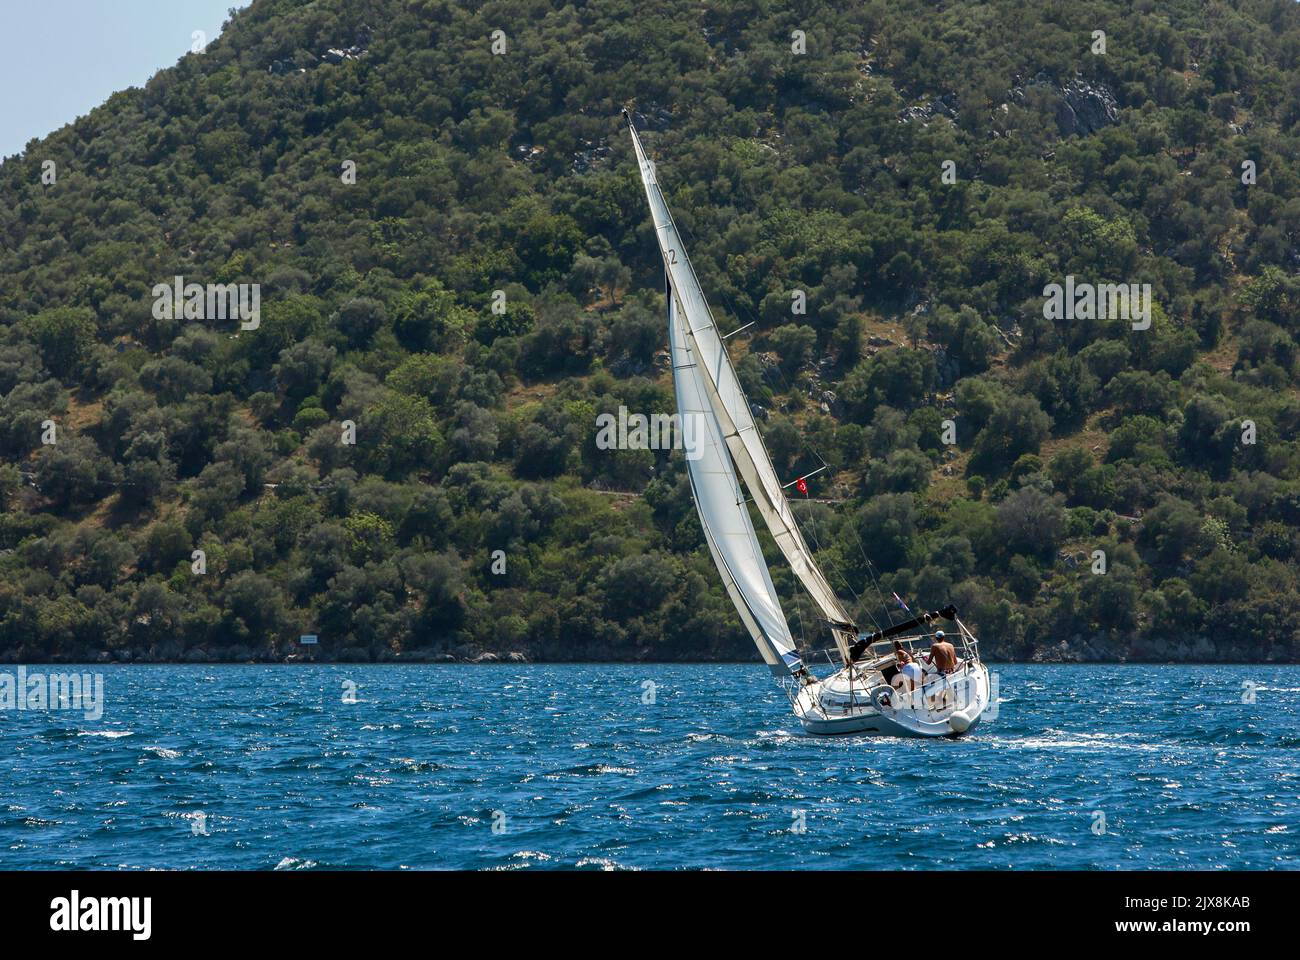 A sailing yacht maneuvers in the Aegean Sea  off the Turquoise coast of Turkey near the port city of Fethiye. Stock Photo